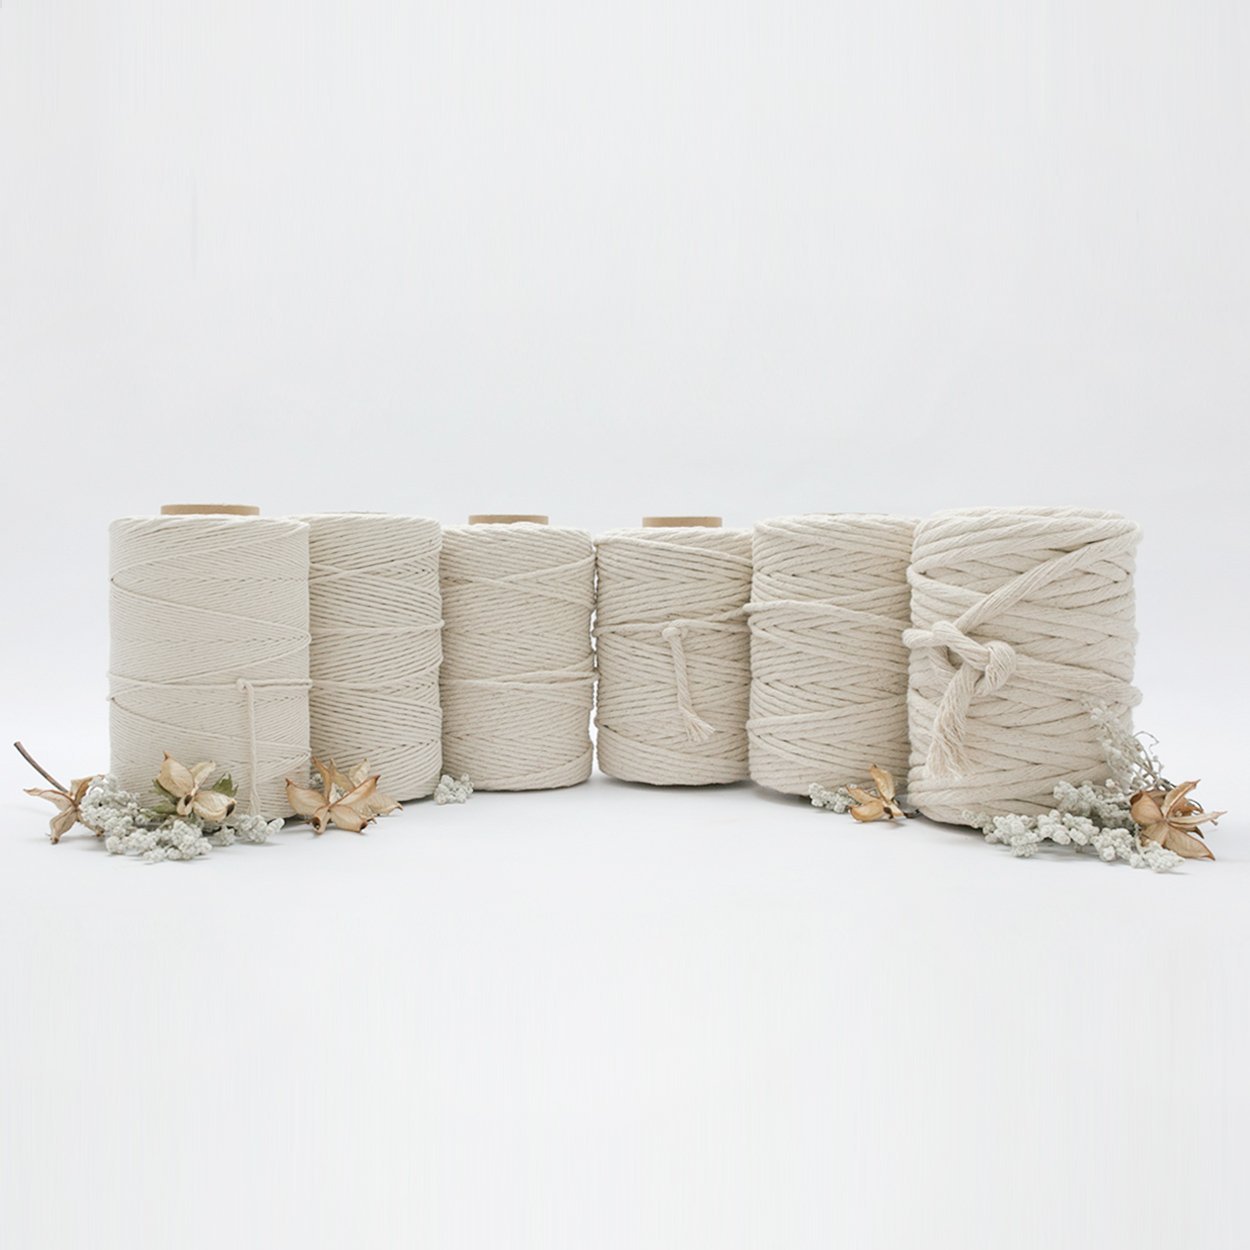 2mm - Macrame Luxe Cotton String / Wholesale Available - Mary Maker Studio  - Macrame & Weaving Supplies and Education.